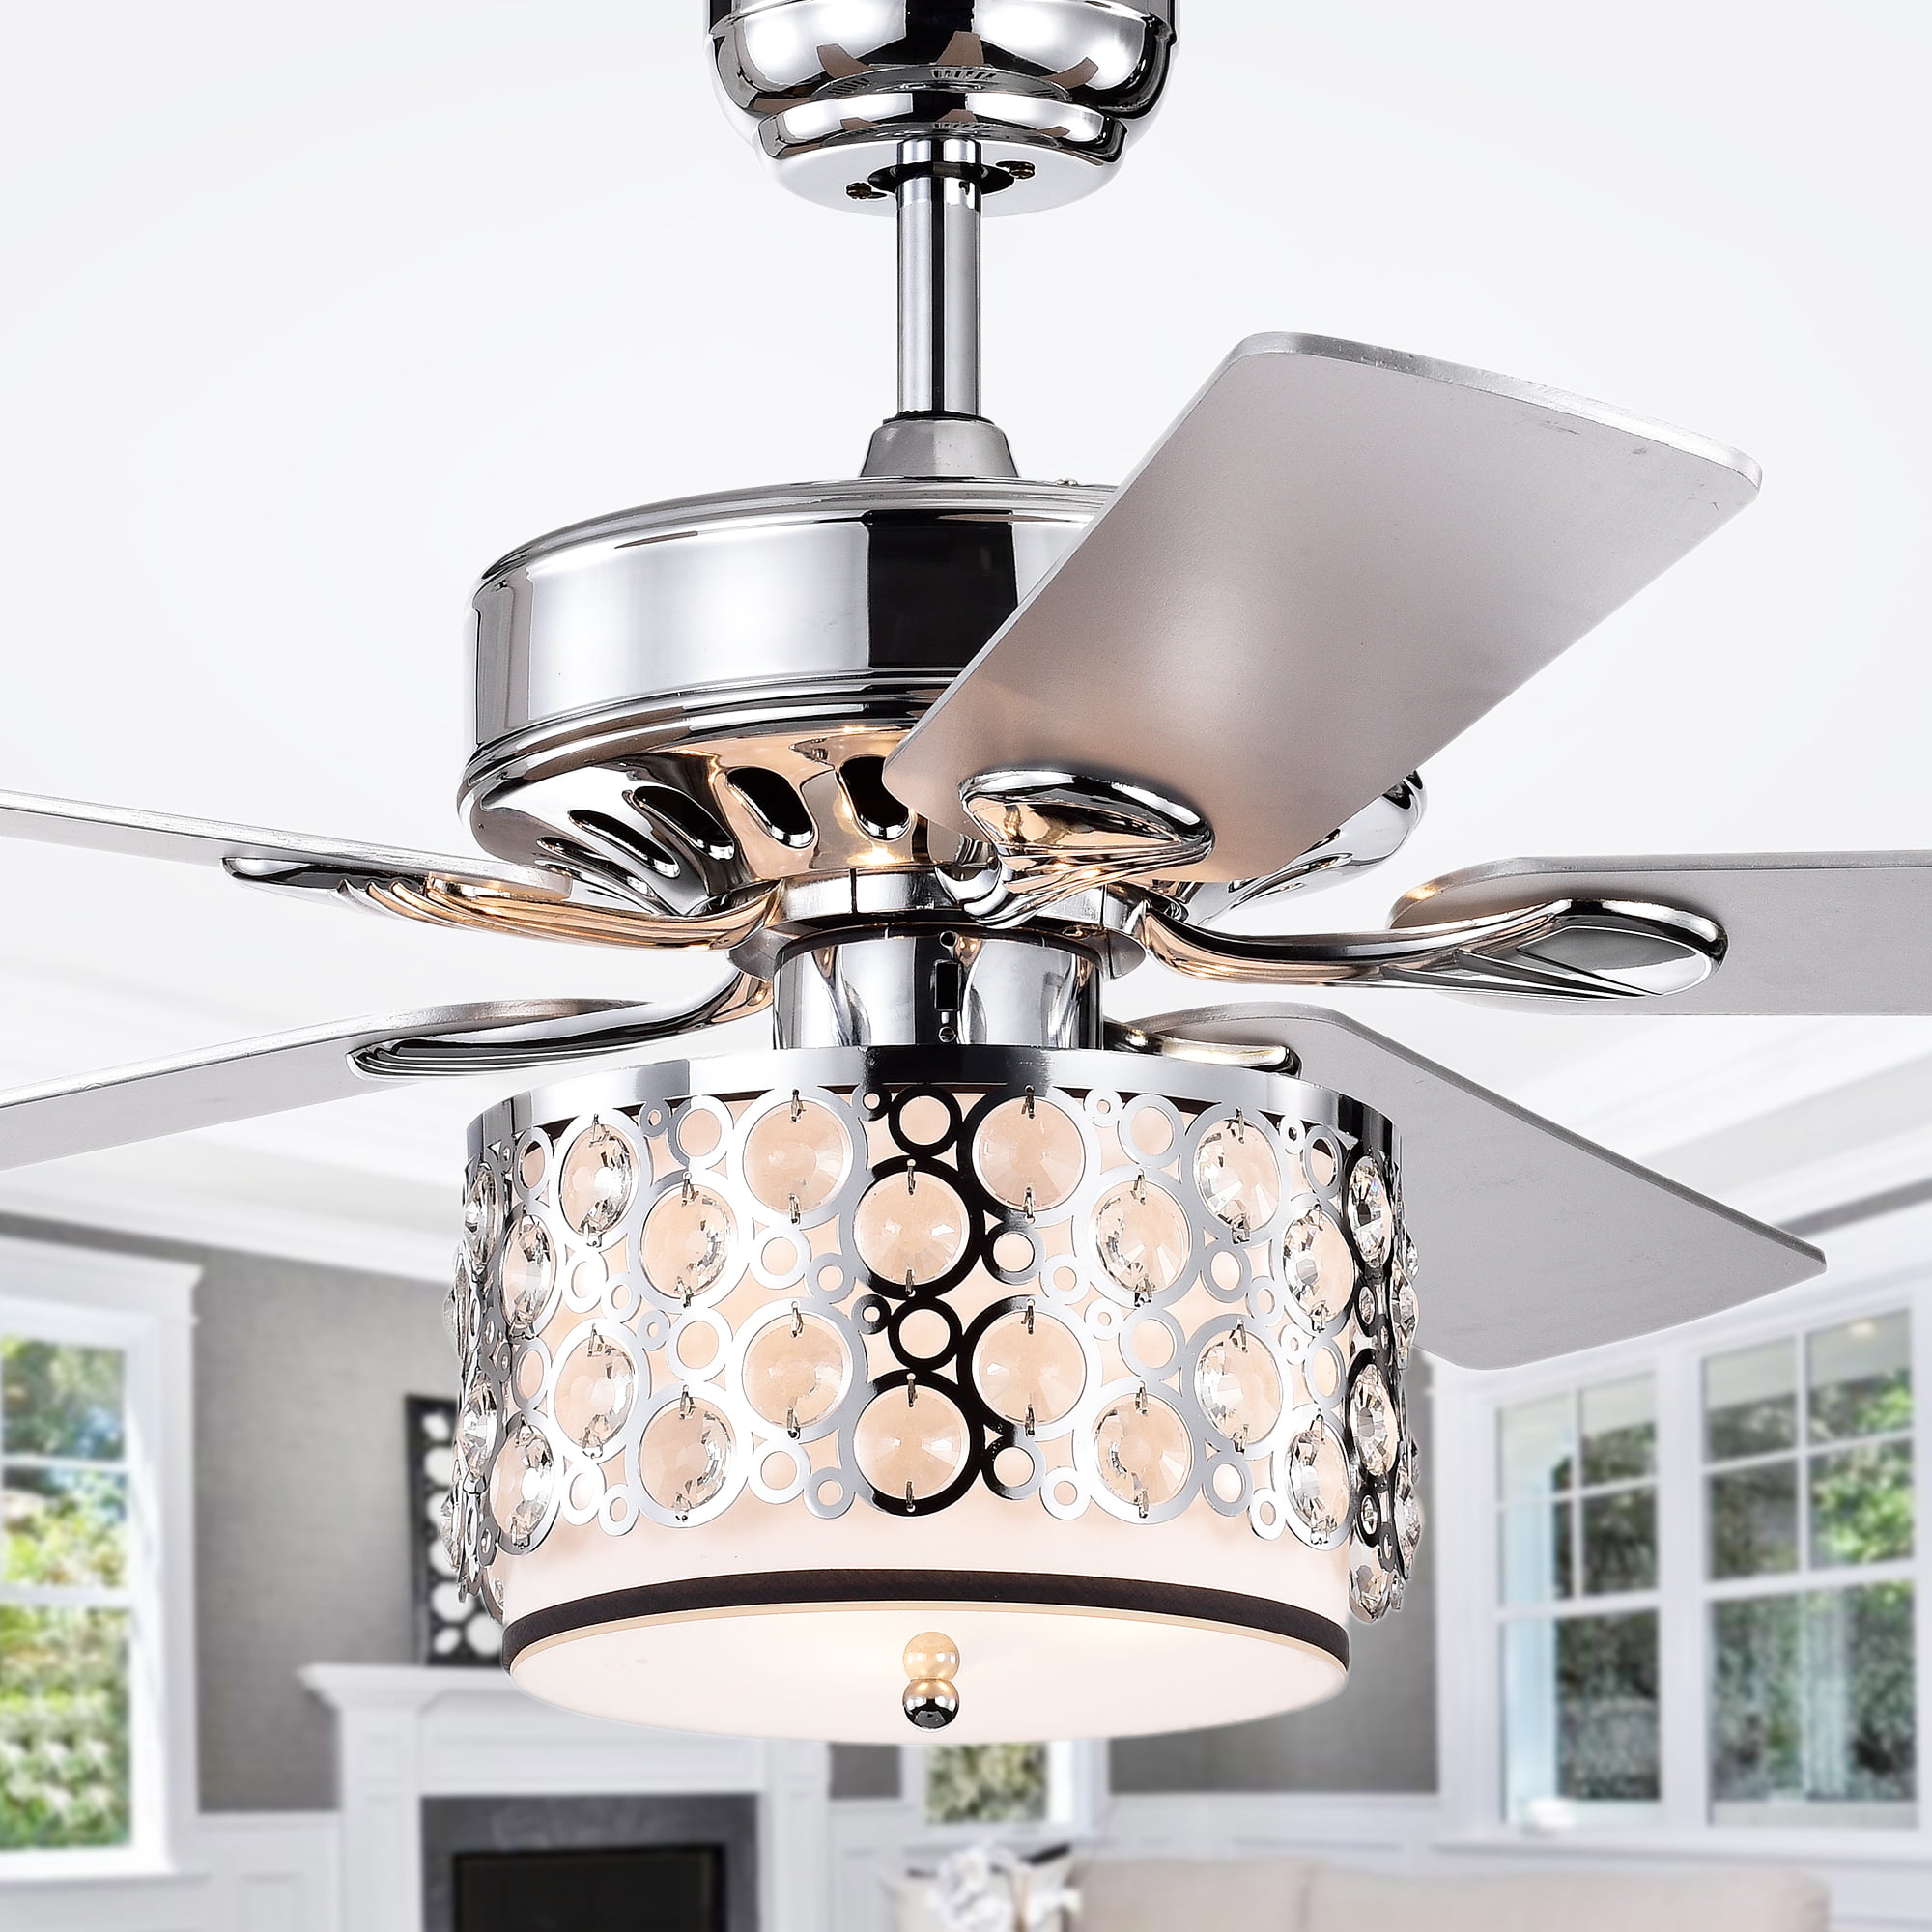 5 Blade Lighted Ceiling Fan With Chrome, 52 In Ceiling Fan With Remote